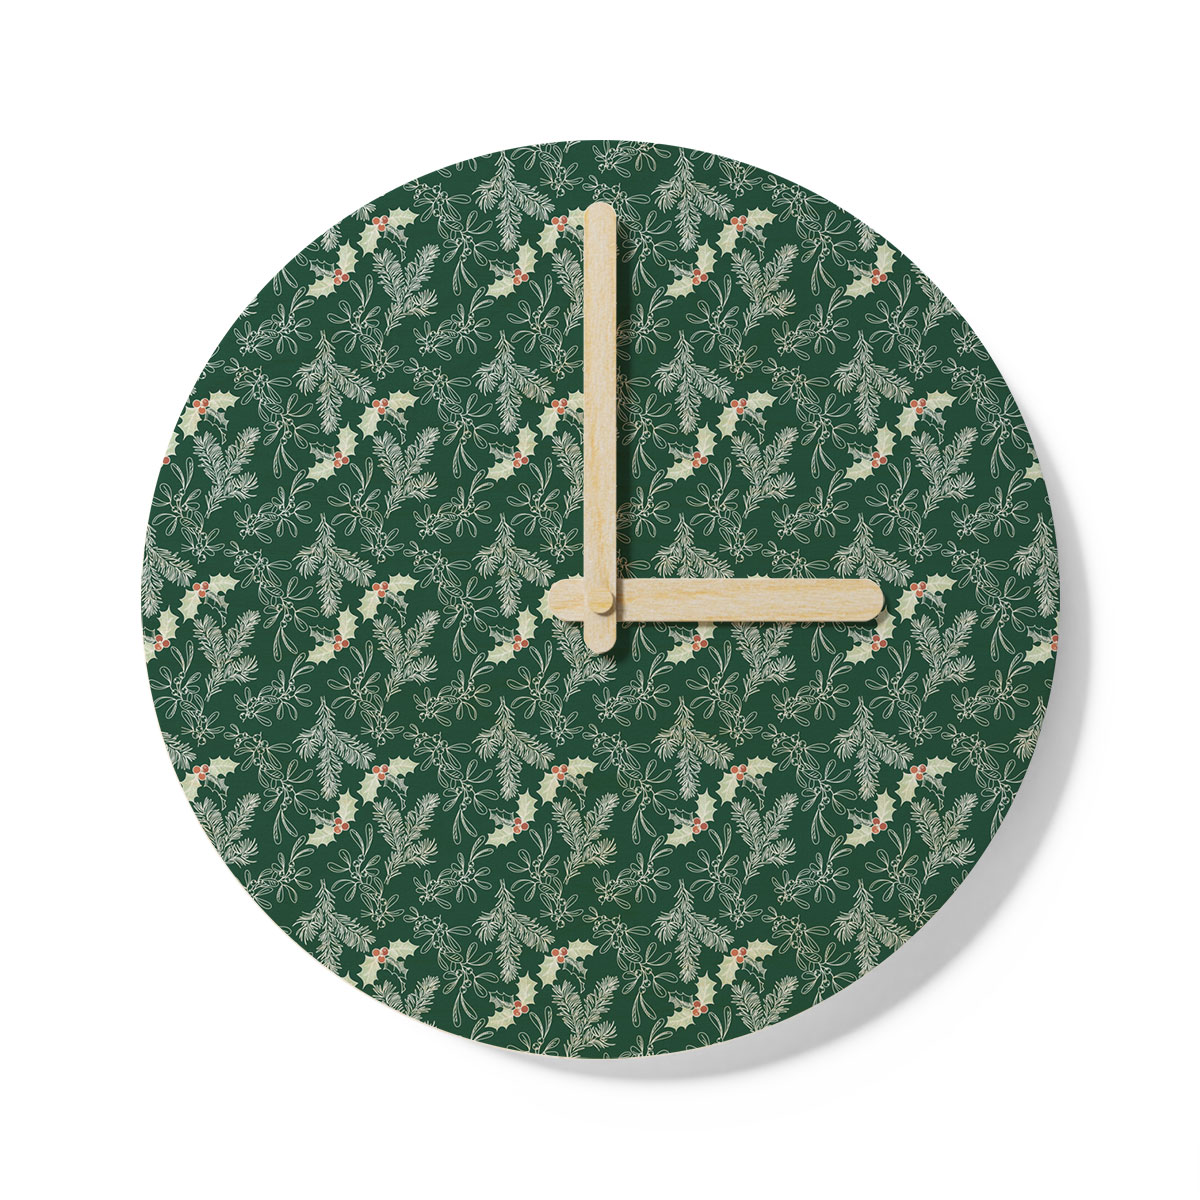 Holly Leaf, Christmas Mistletoe And Pine Tree Branche Wooden Wall Clock